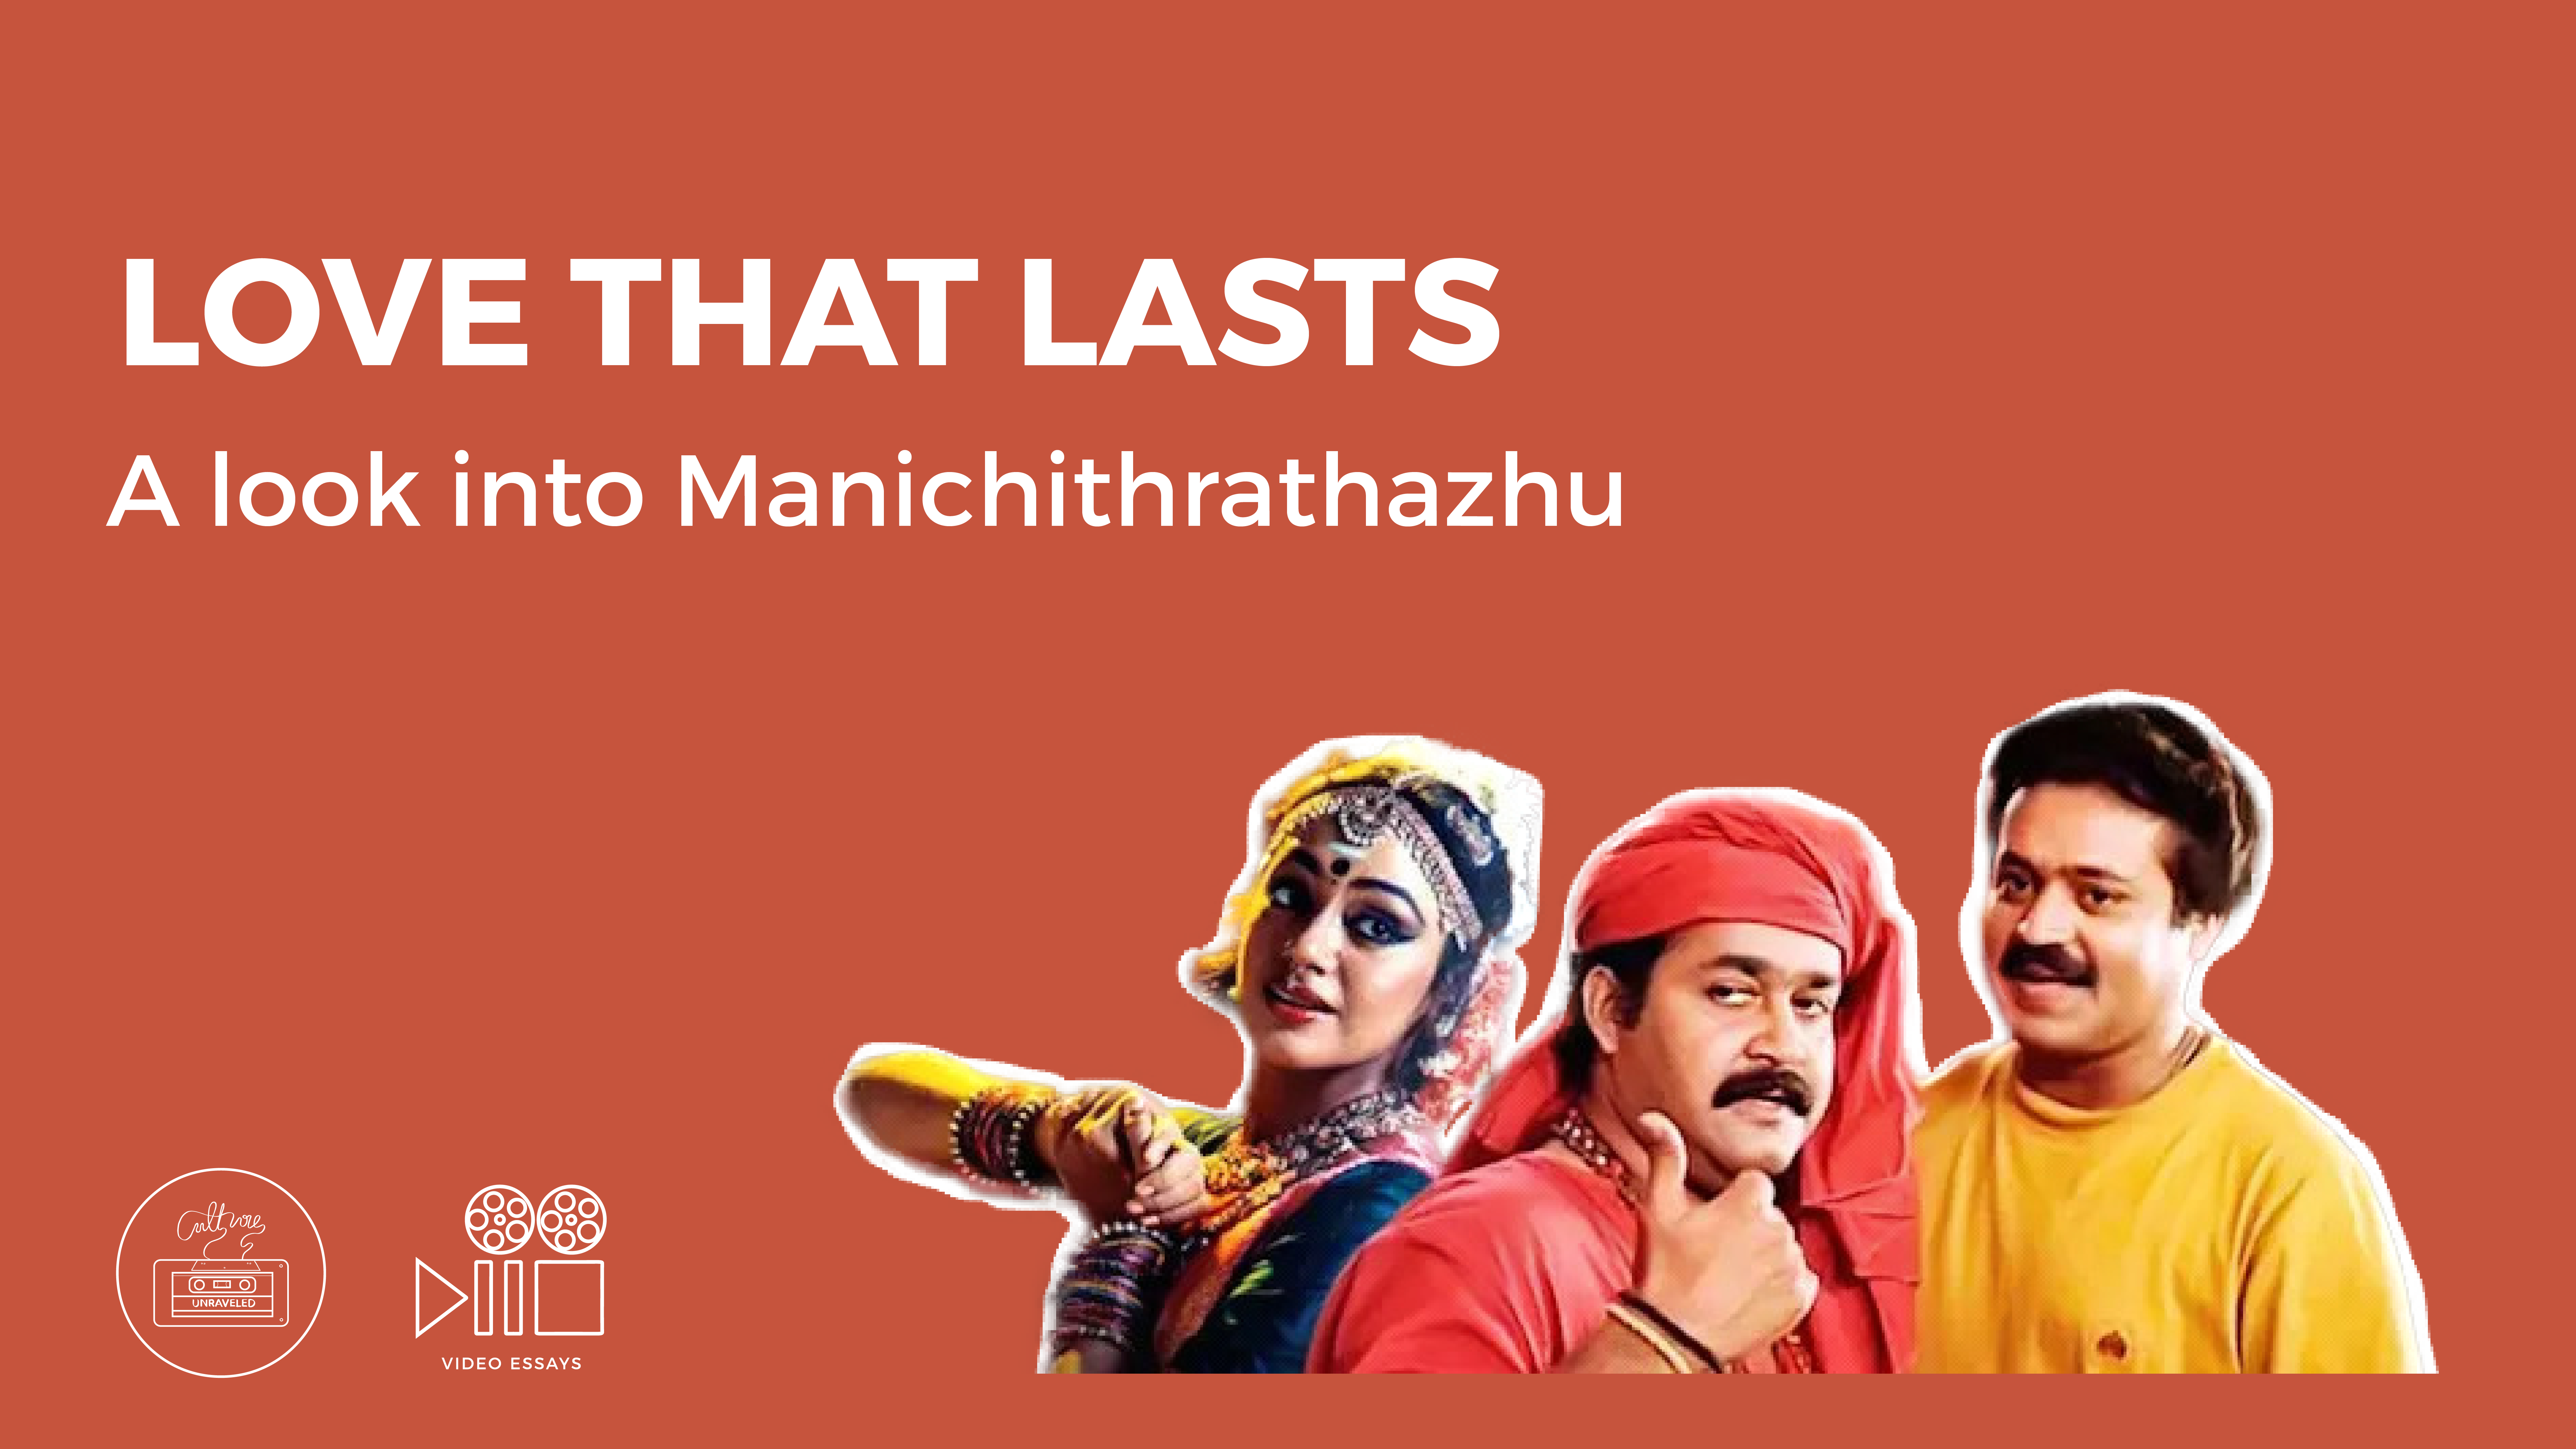 Love that Lasts. A look into Manichithrathazhu